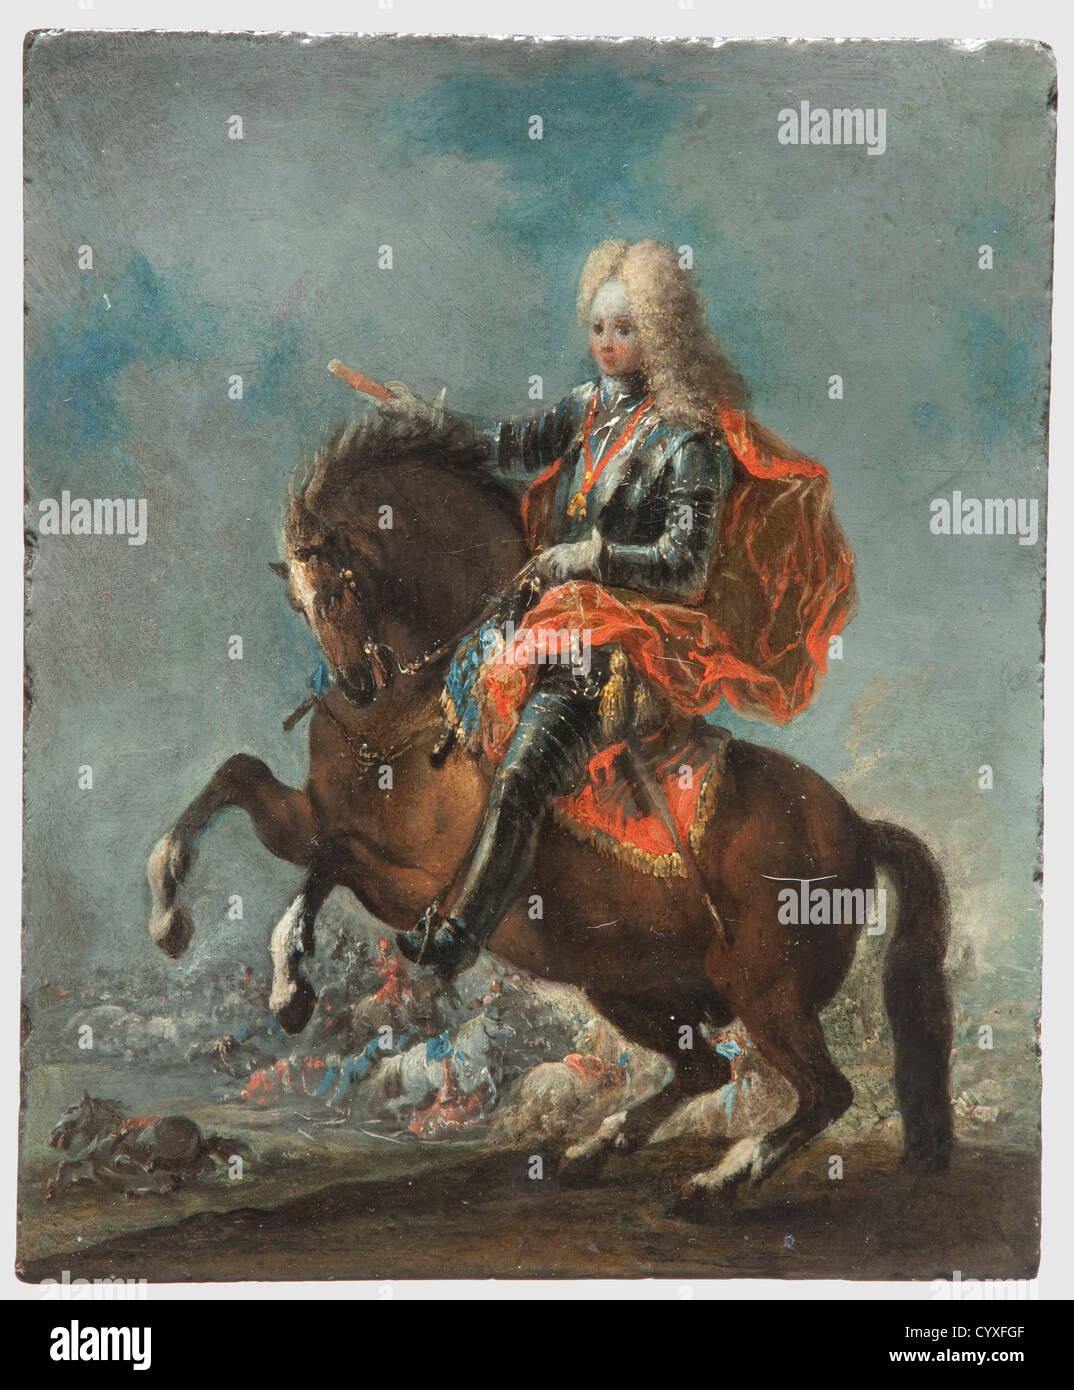 Prince Eugen of Savoy-Carignan (1663 - 1736), a portrait on horseback, 18th century Oil on slate. A portrait of the young prince on horseback in blued armour, holding a Marshallïs baton in his right hand, with a cavalry battle in the background. Unsigned. Princely inventory label on the back. Dimensions 23.5 x 19.5 cm. From the possessions of a southern German noble. Cf. the portrait of Prince von Gottfried Auerbach on horseback, at the Military Historical Museum in Vienna. Prince Eugen was one of Austriaïs most famous generals and from 1697 was Commander in Ch, Stock Photo